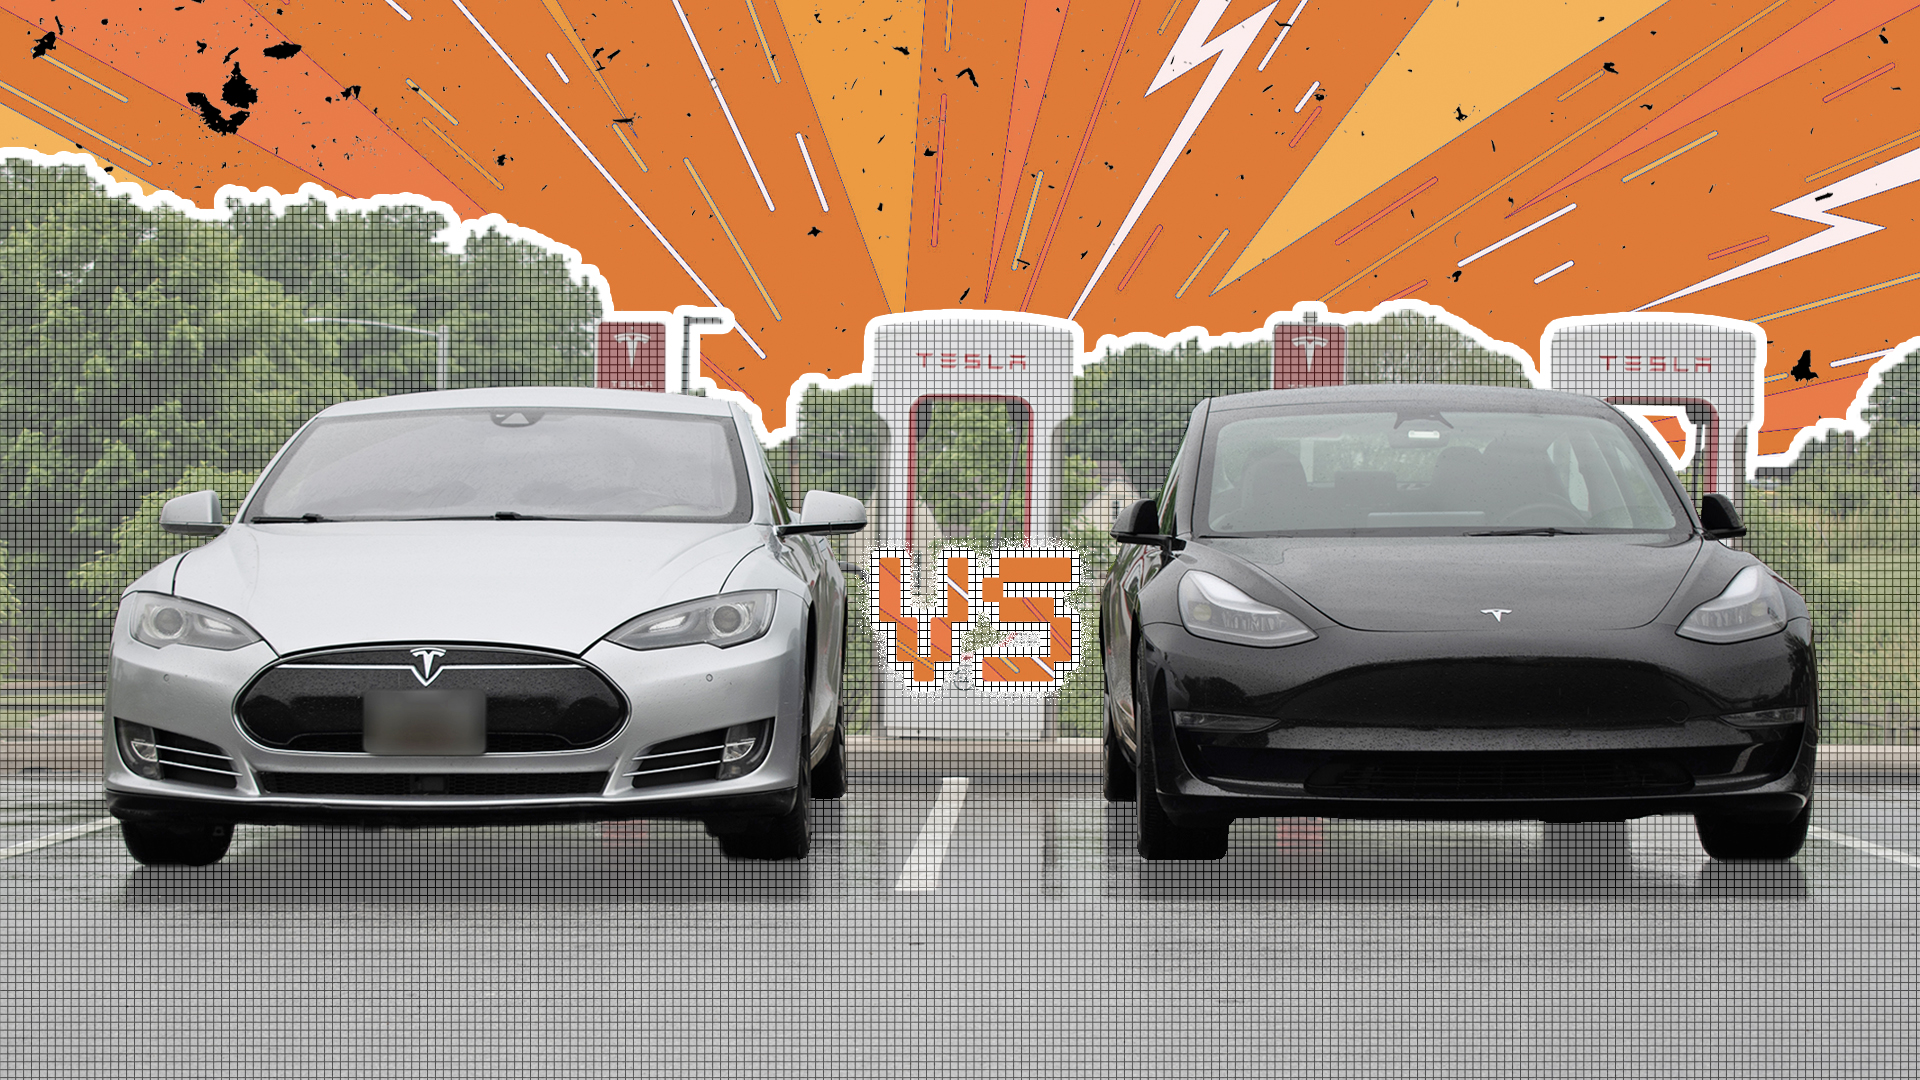 Your Tesla Model 3 Questions Answered - Kelley Blue Book